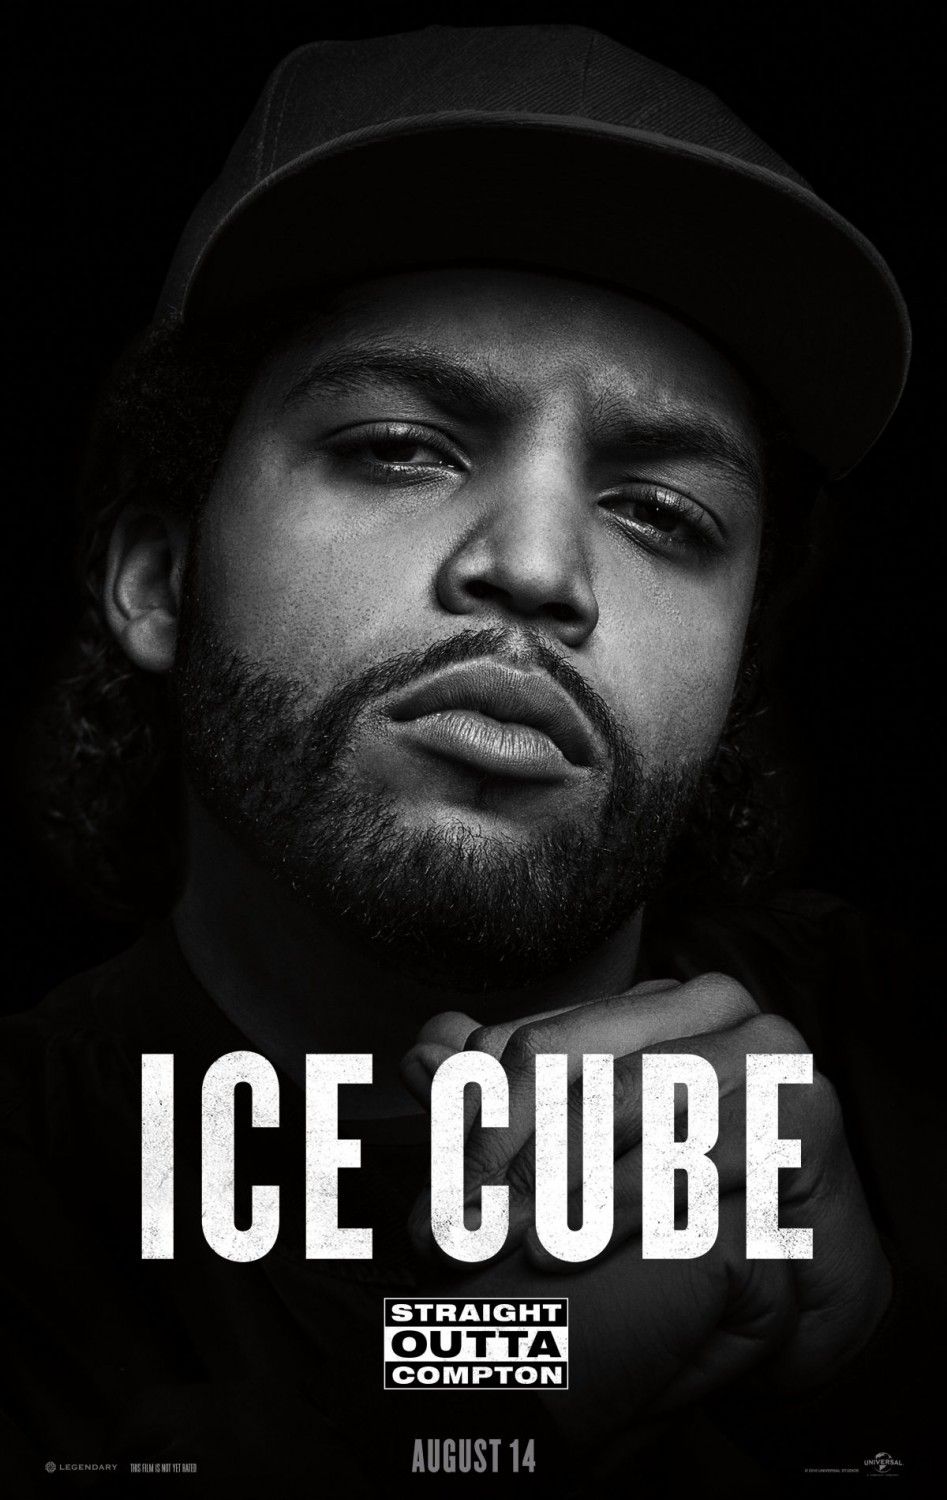 Straight Outta Compton Ice Cube Character Poster